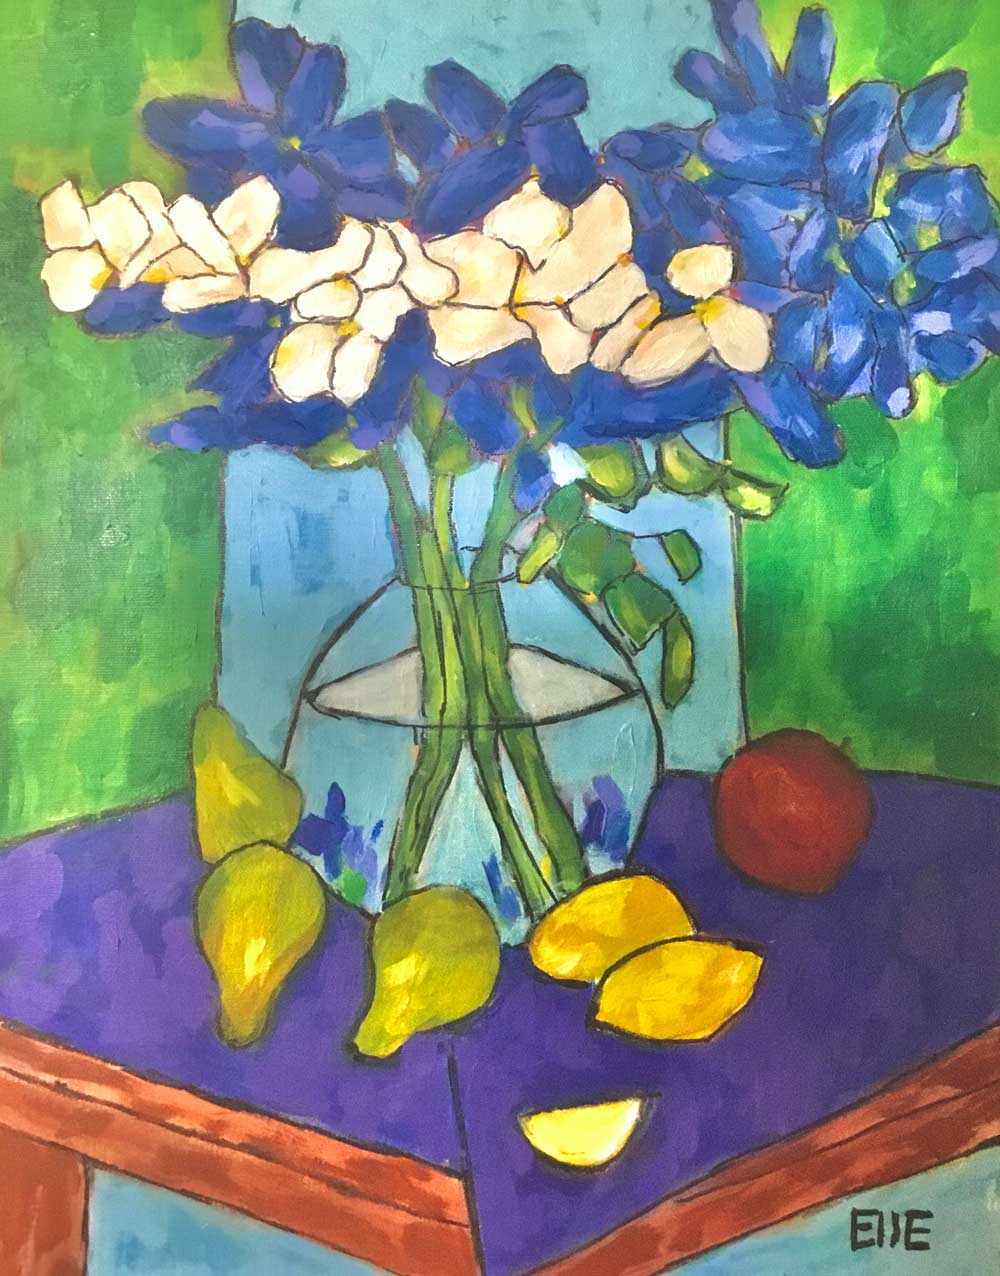 White and blue flowers in acrylic paint